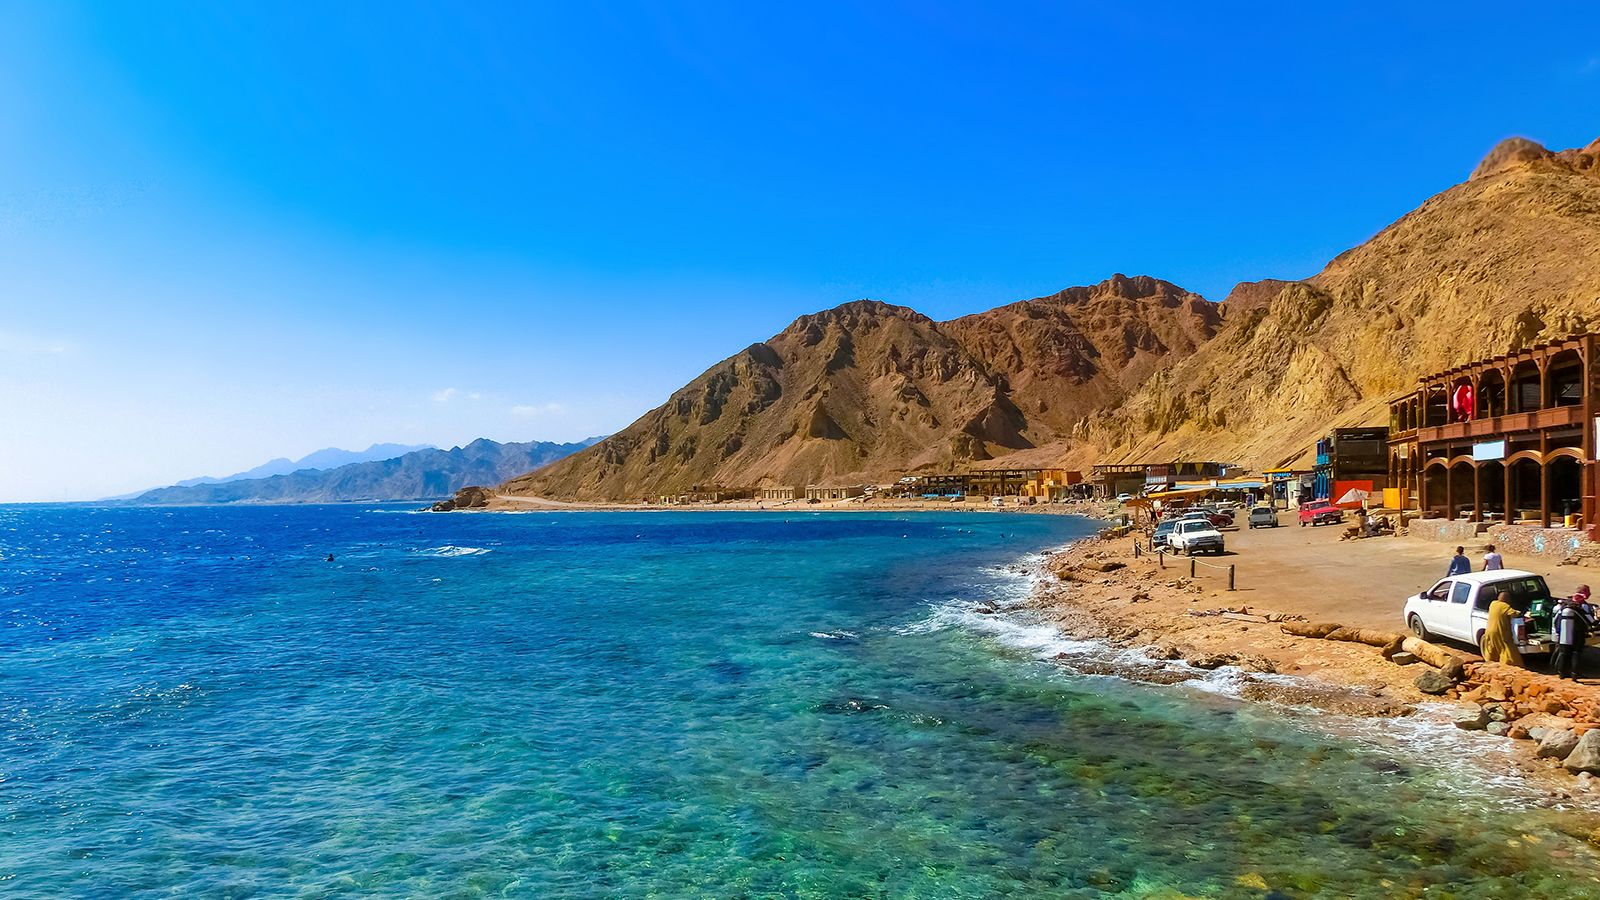 Dahab: A Digital Nomad Haven in Egypt?! Why This City Stole My Heart